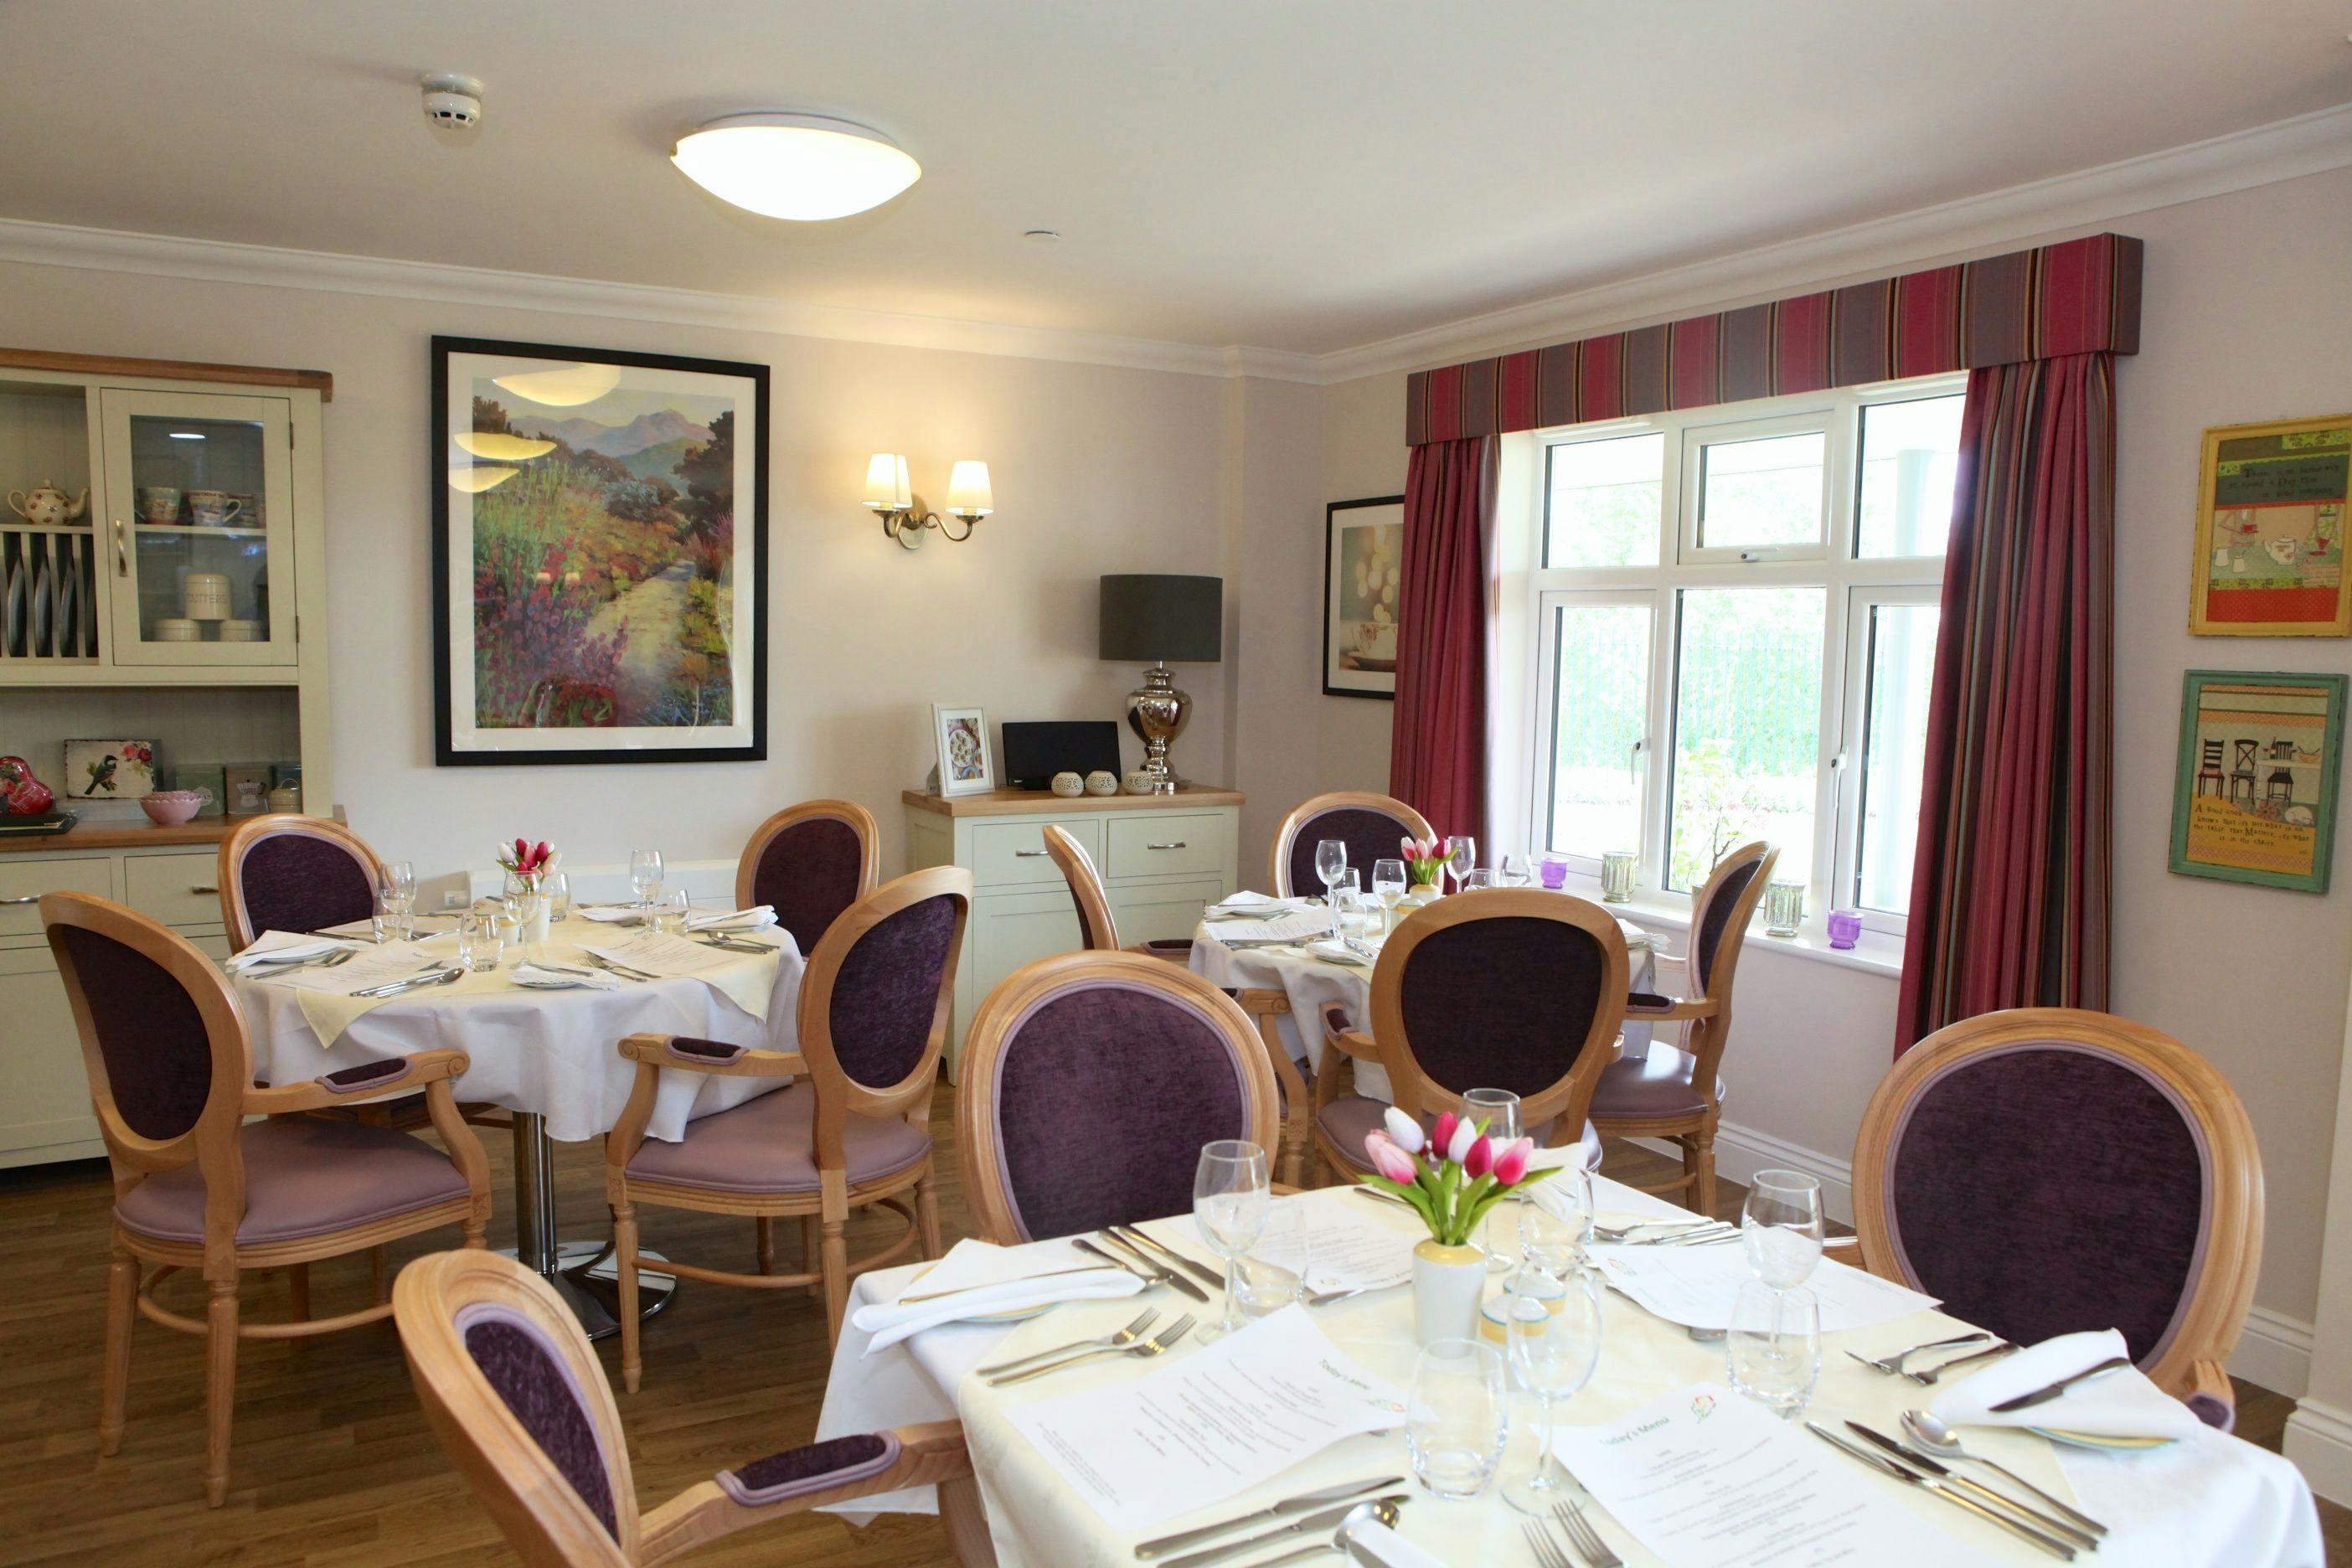 Dining room of Bryn Ivor Lodge care home in Newport, Cardiff